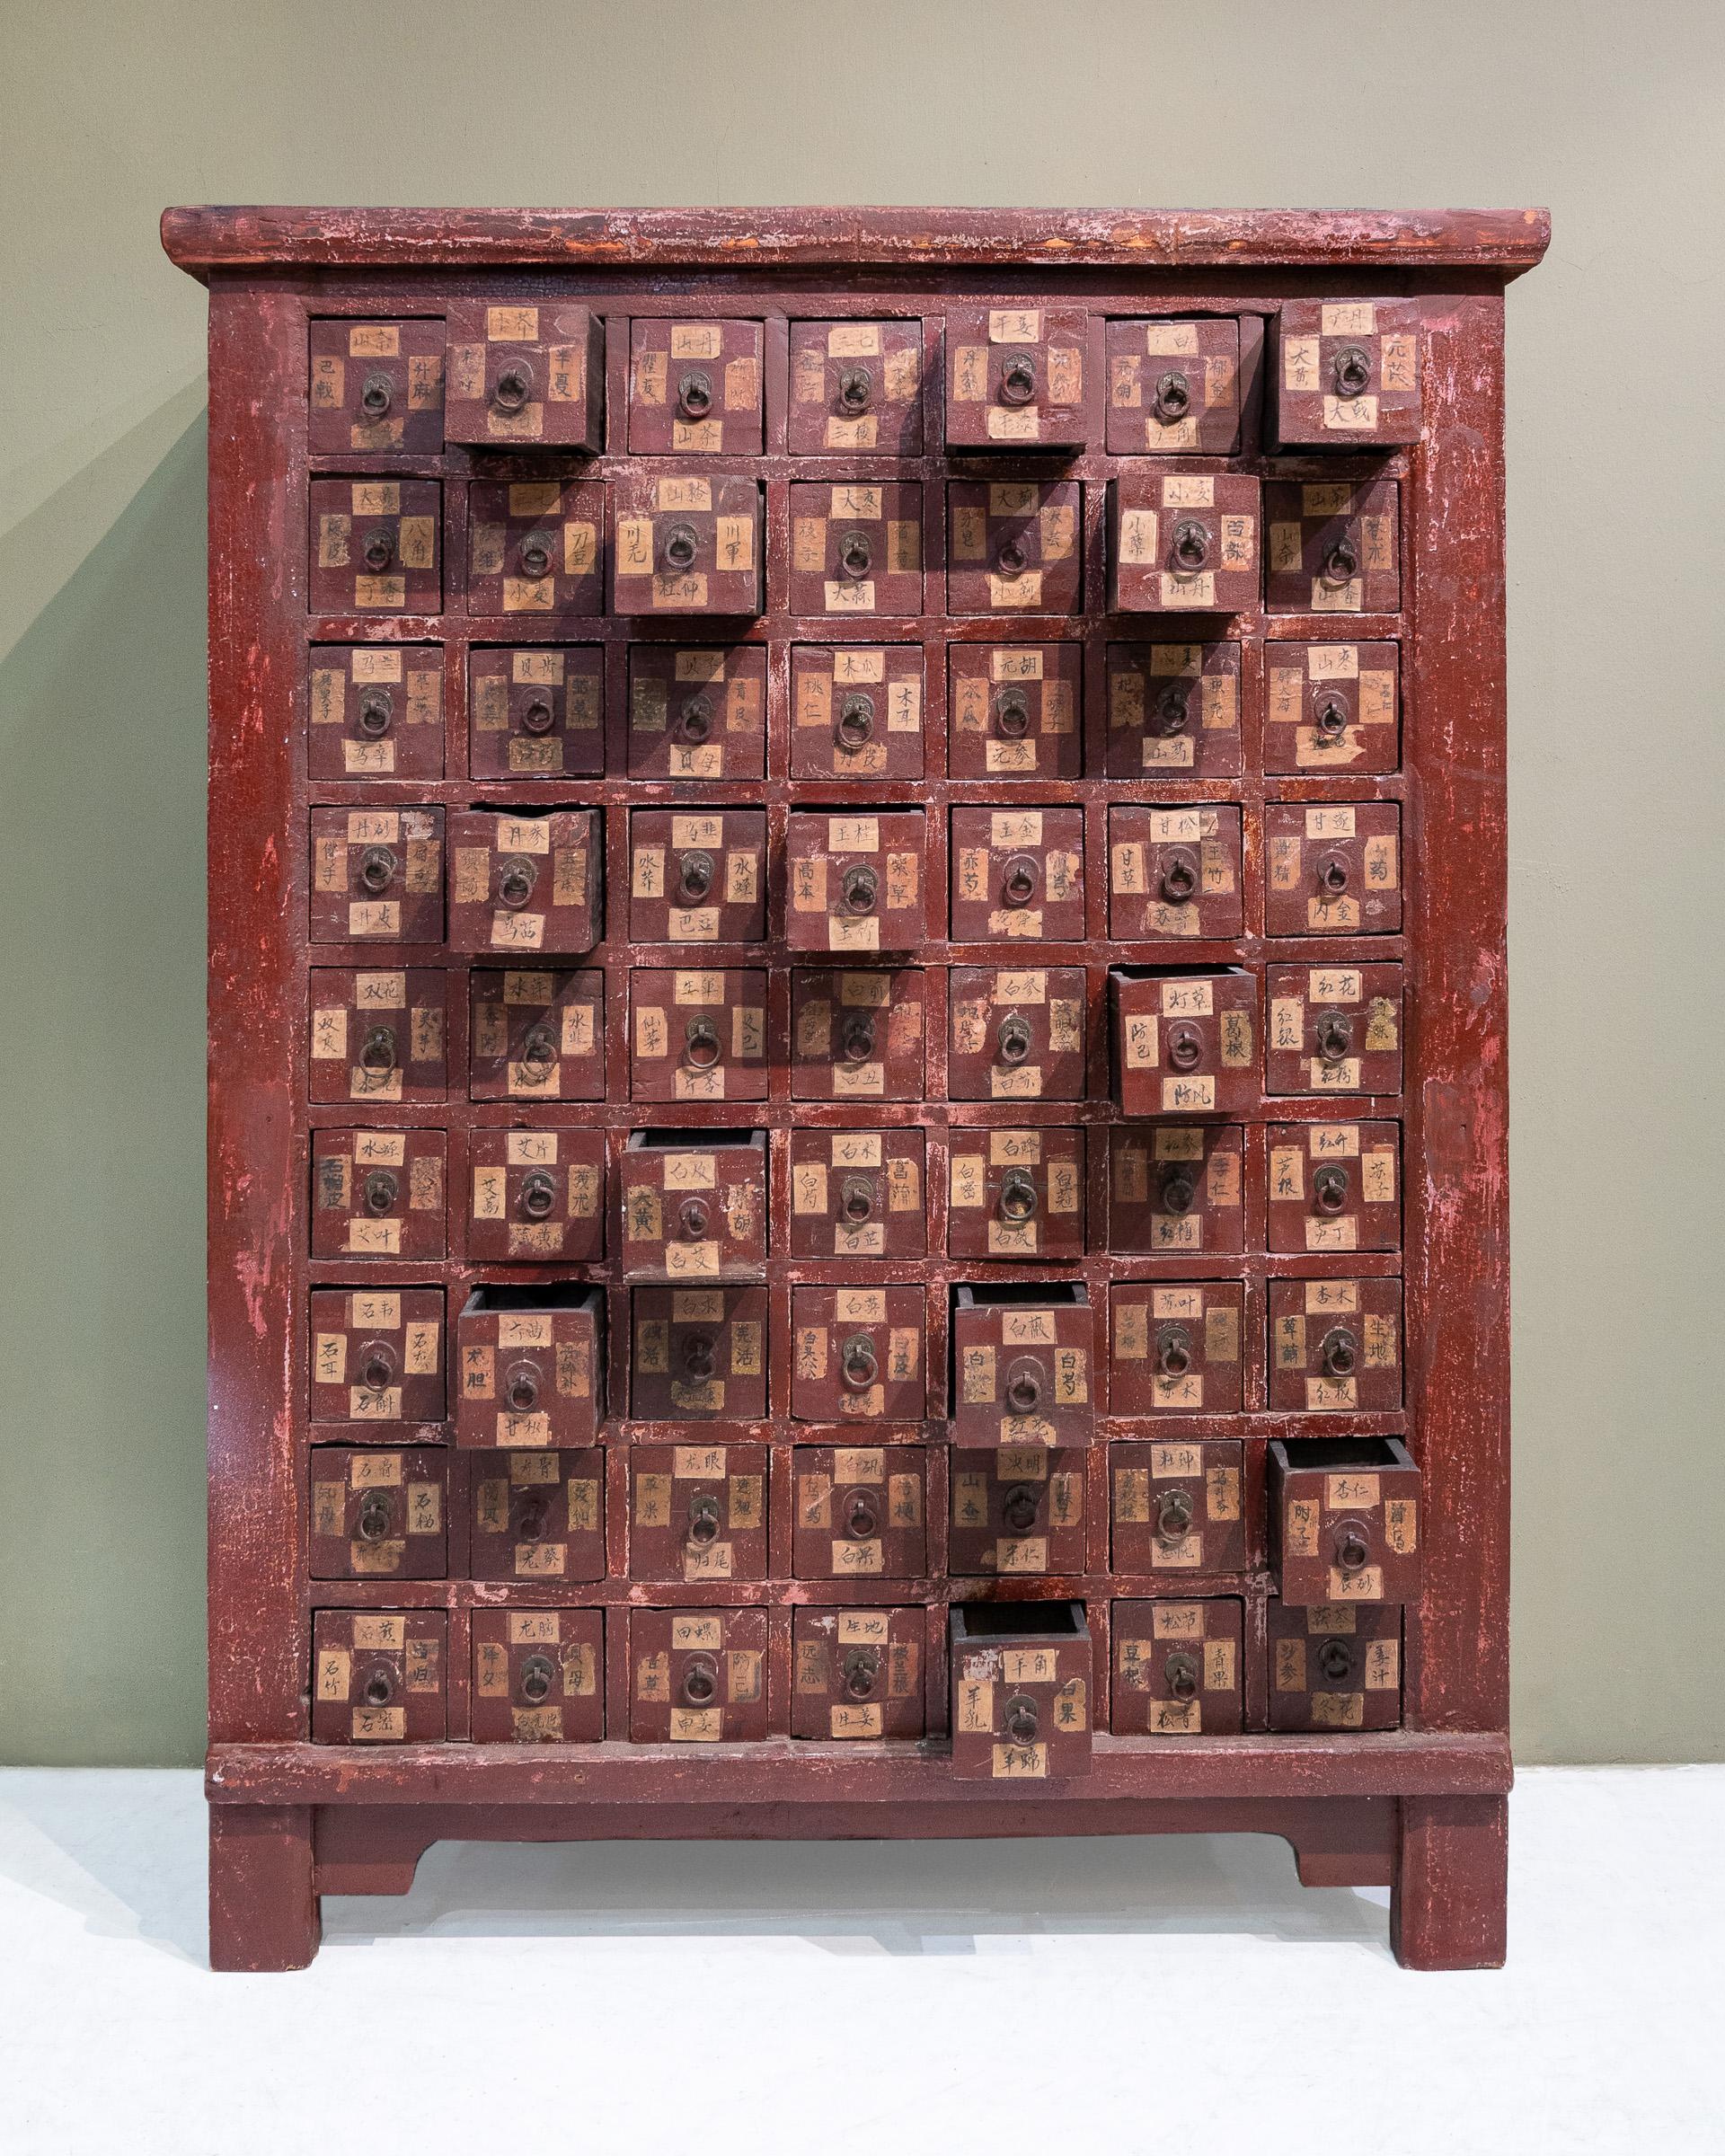 Late 19th century Chinese apothecary cabinet from Shanxi, China. These were used to store and organise Chinese herbs and the drawers were labeled according to the herbs that were stored inside. Many of the dividing panels inside the drawers were